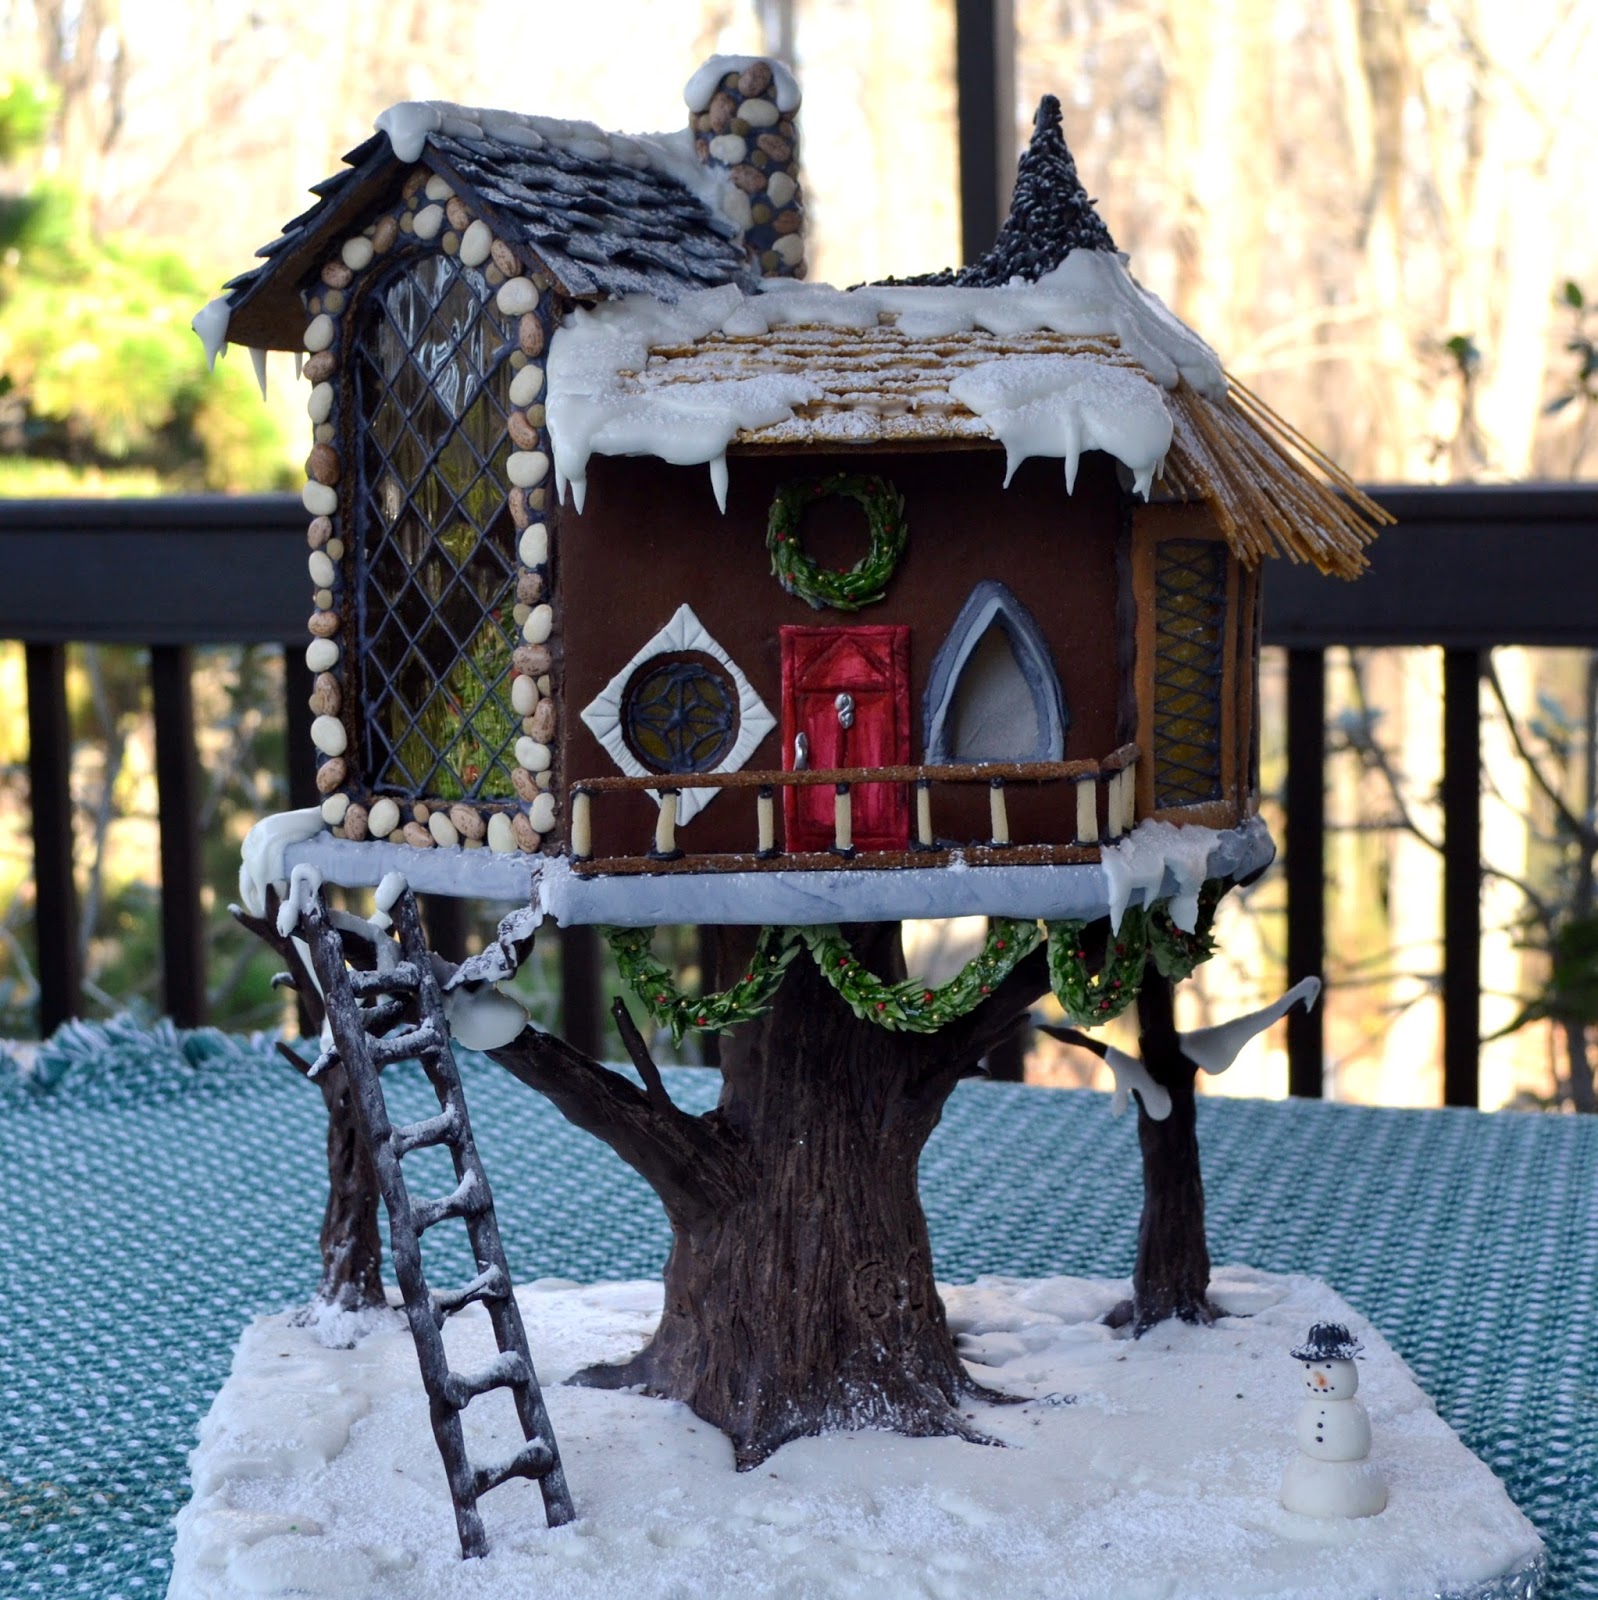 My Paisley World: Peddler's Village Gingerbread House Competition 2015